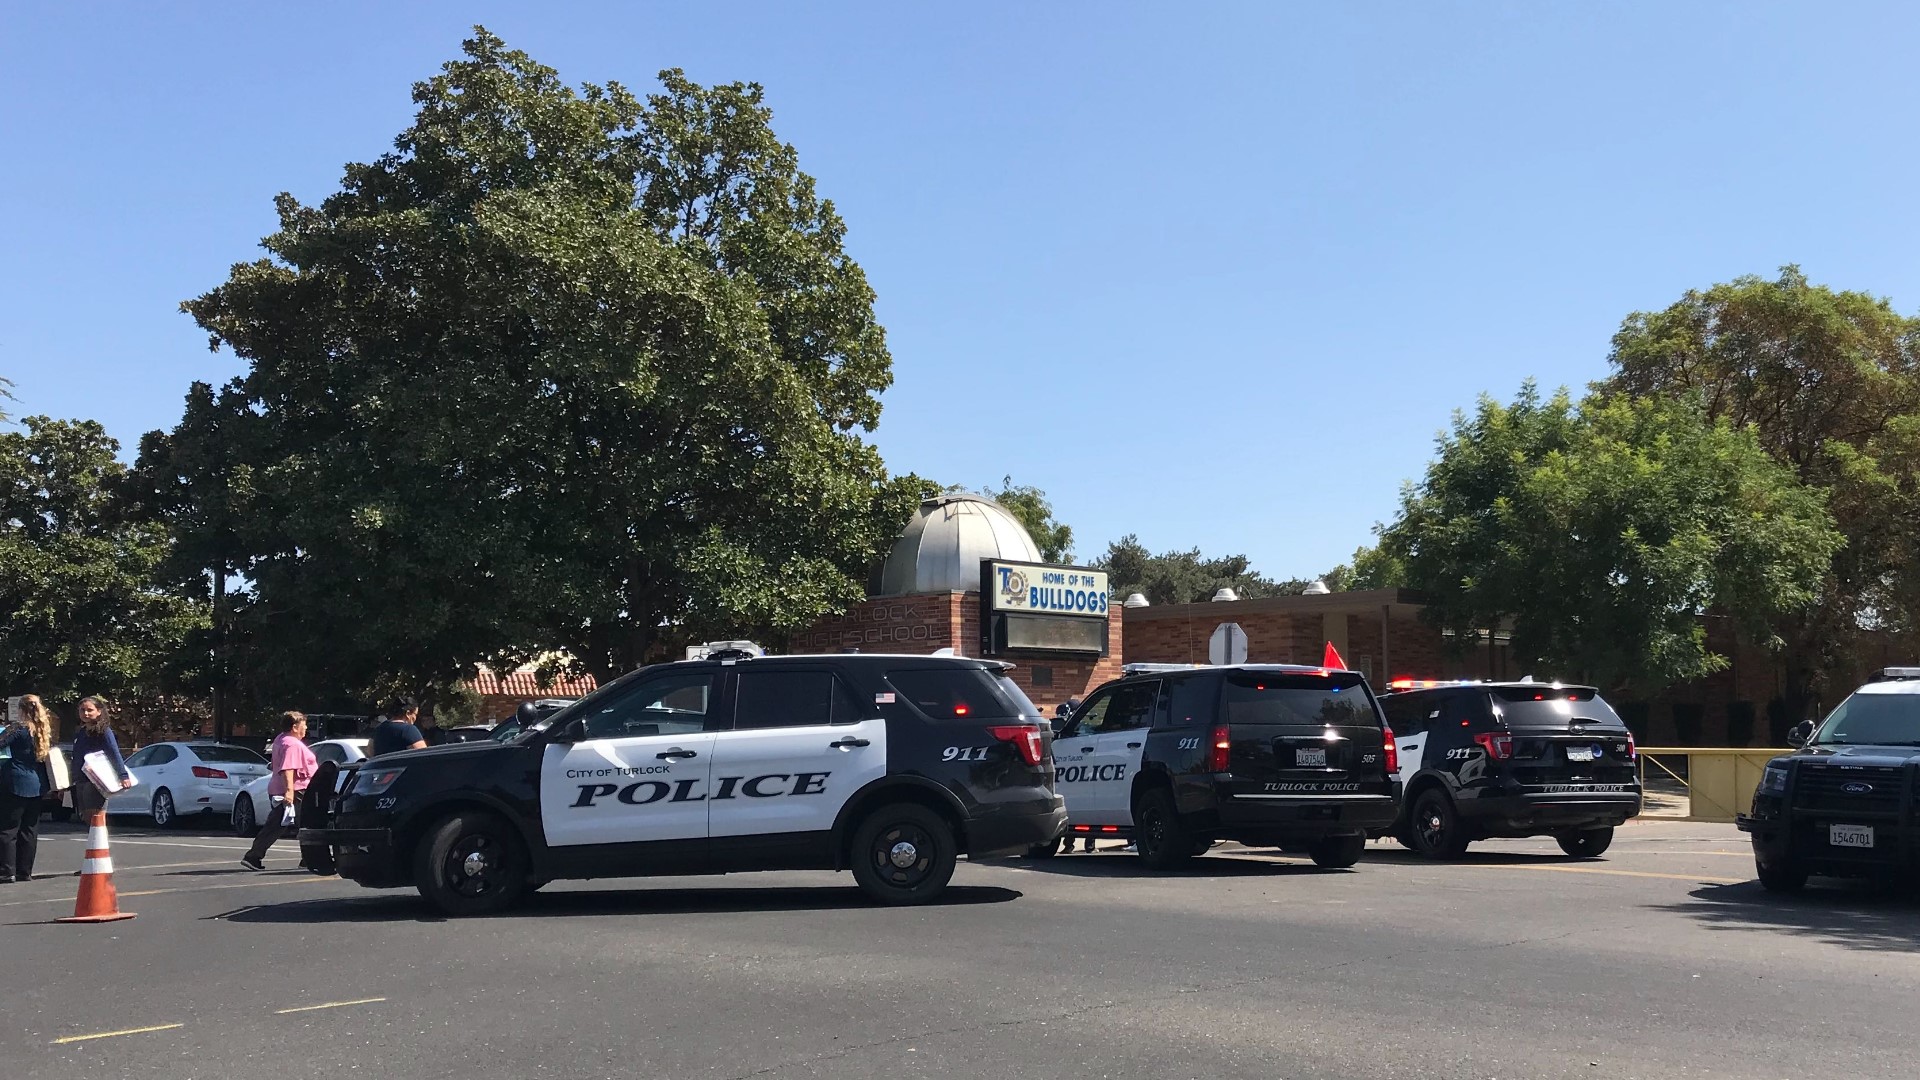 Five schools in the Turlock Unified School District and two administrative offices were placed on lockdown after police officers reported gunshots near Turlock High School.